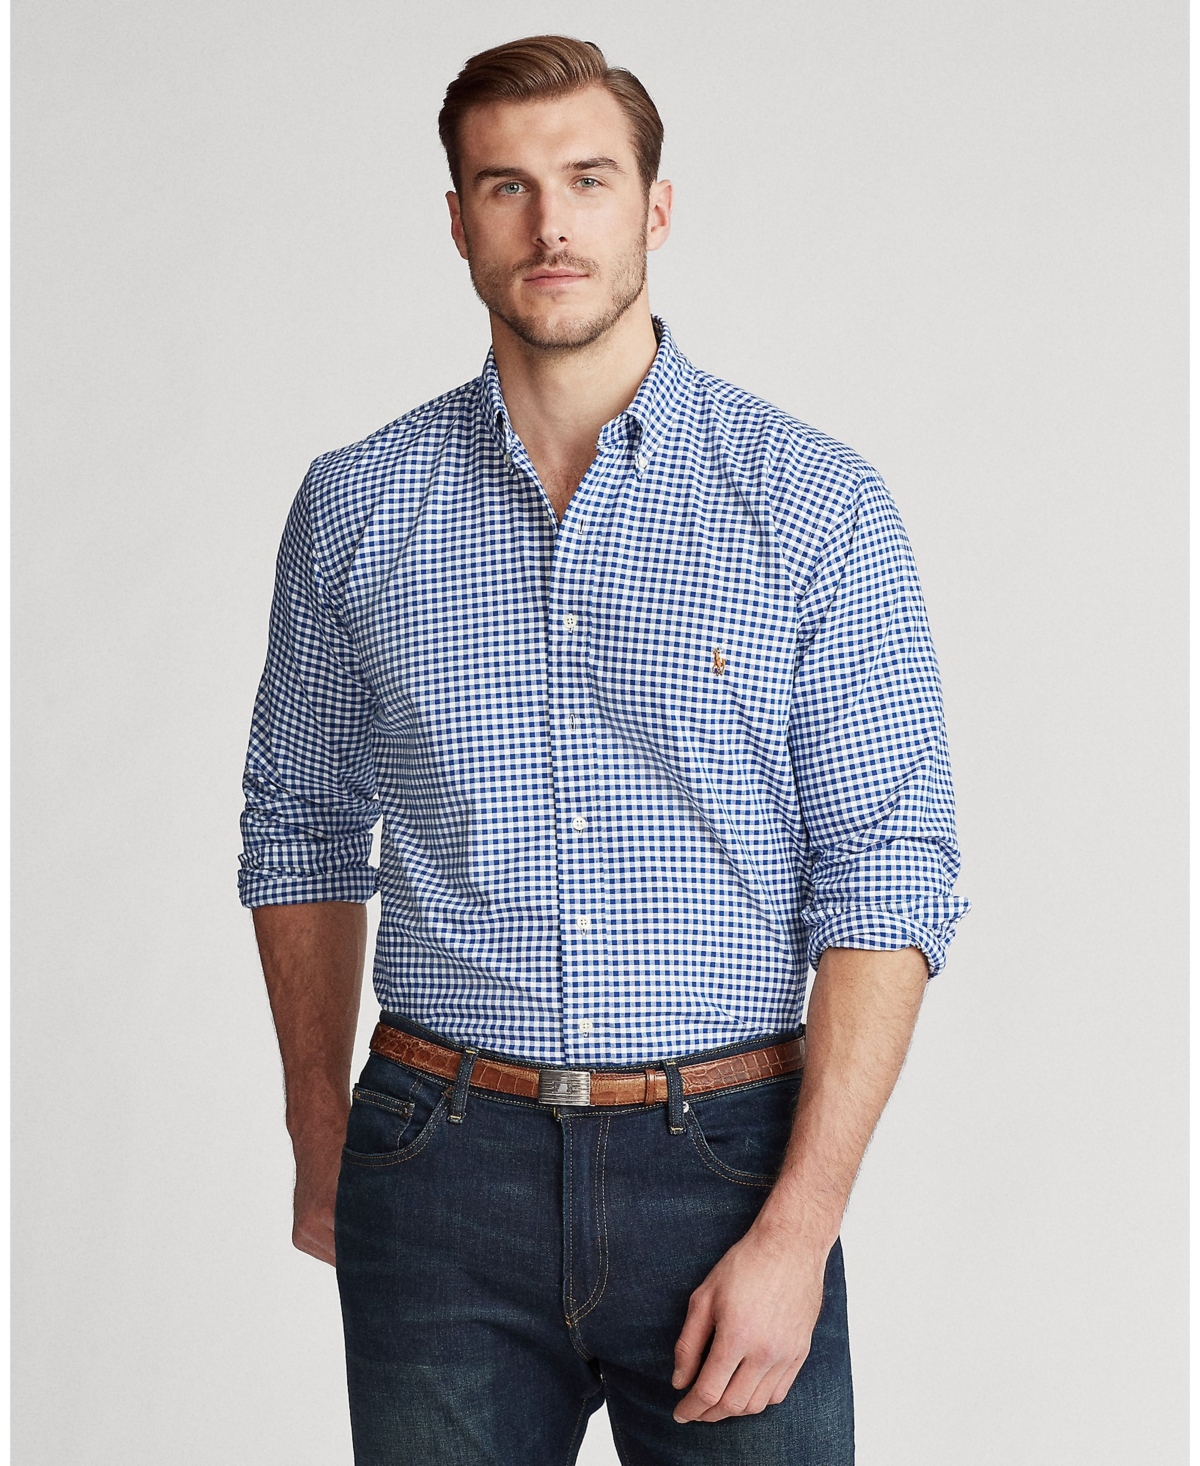 Polo Ralph Lauren Men's Big & Tall Classic Fit Plaid Oxford Shirt In Blue,white Gingham